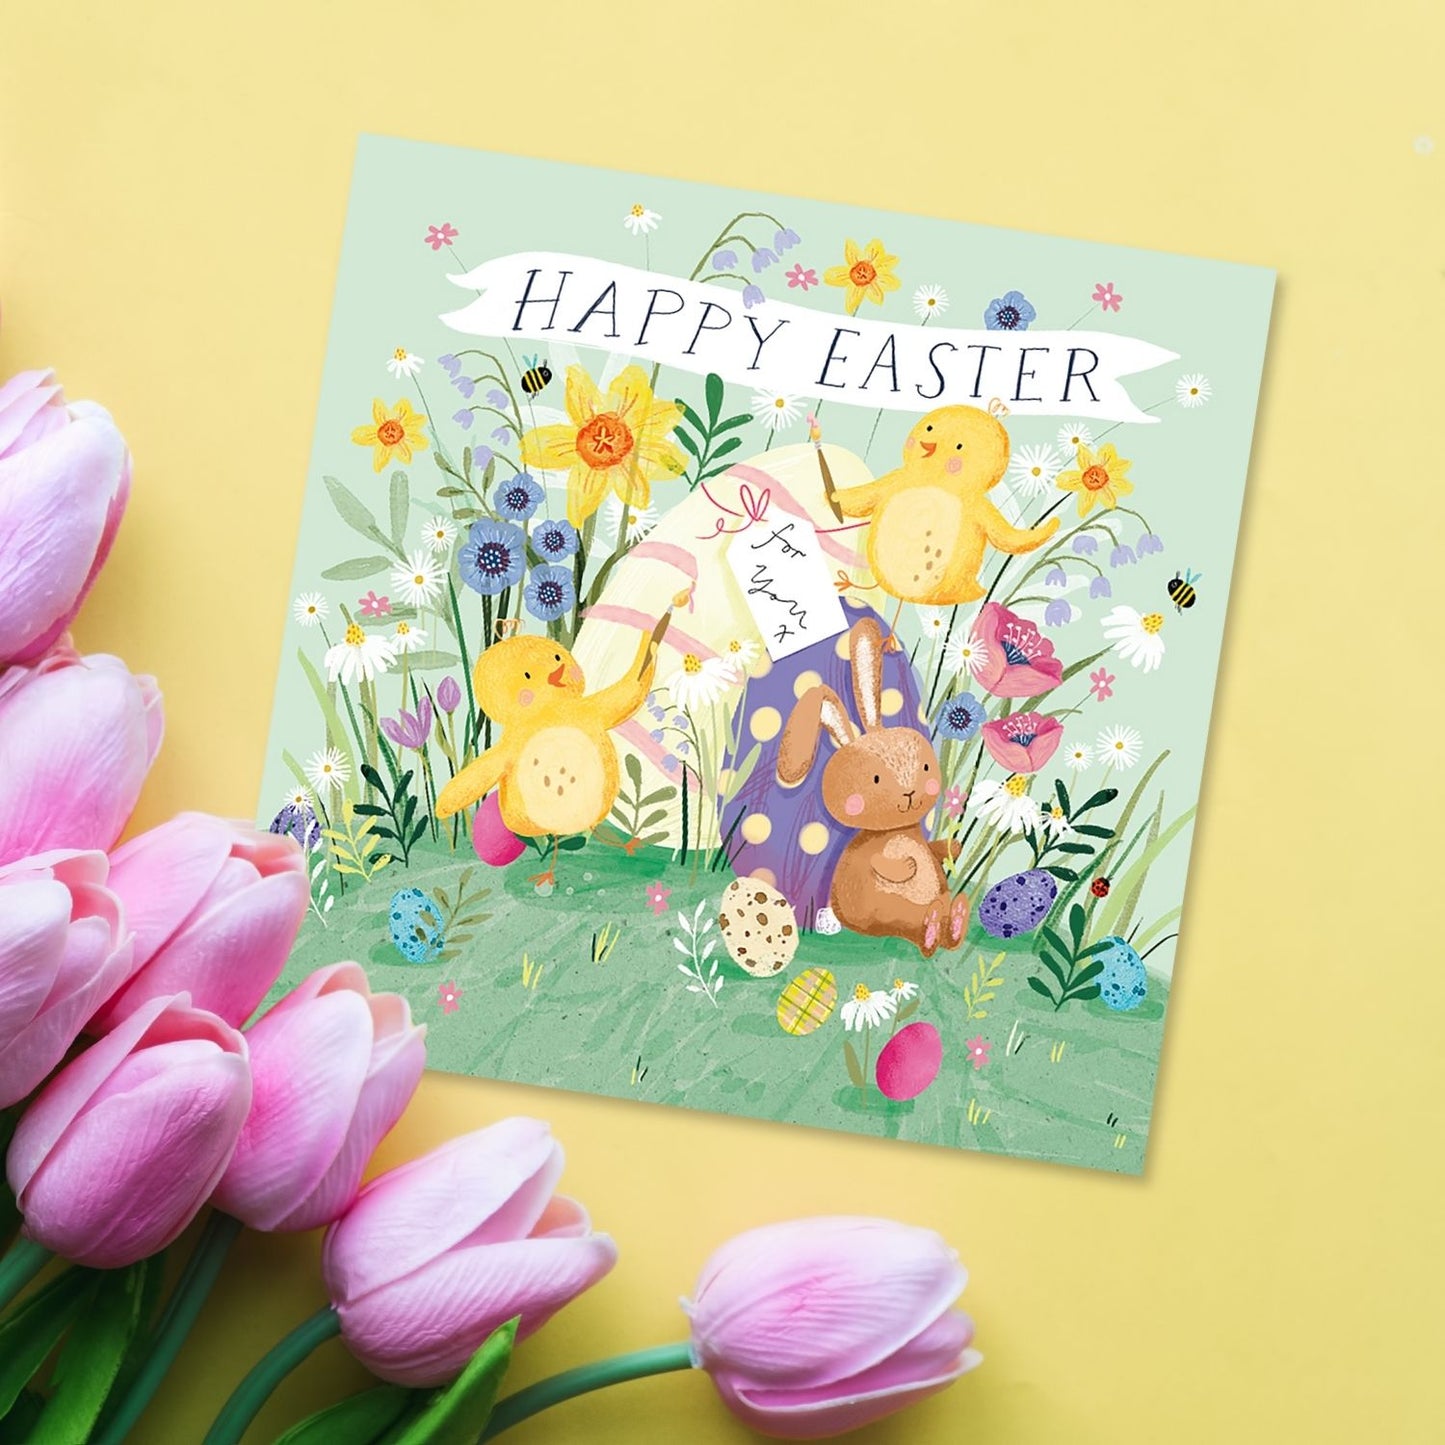 Pack Of 5 Happy Easter Chirpy Easter Fun Pack Of Easter Greeting Cards